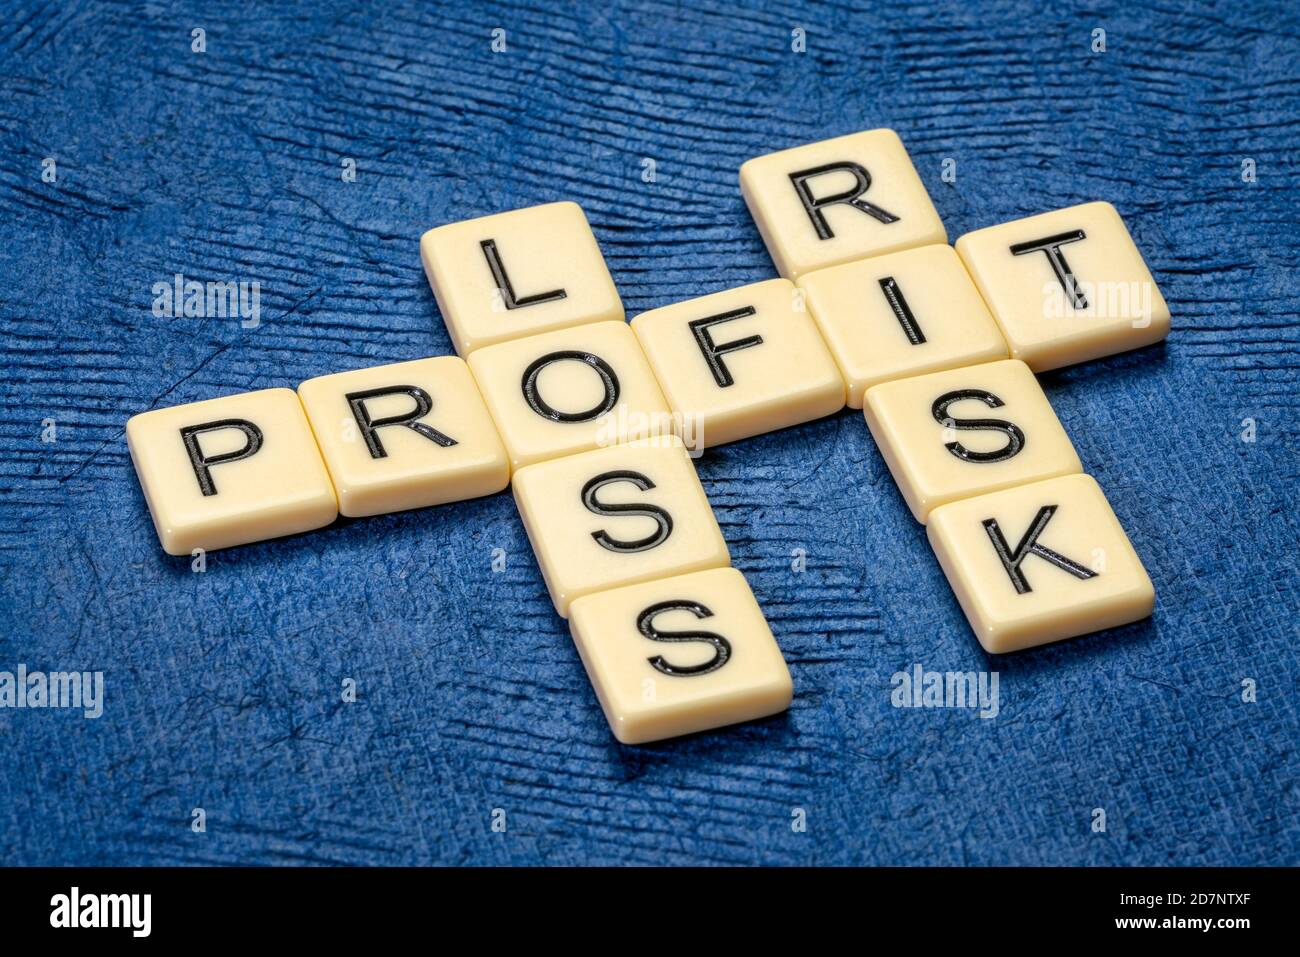 profit, loss and risk crossword in ivory letters against textured handmade bark paper, business, finance and investing concept Stock Photo